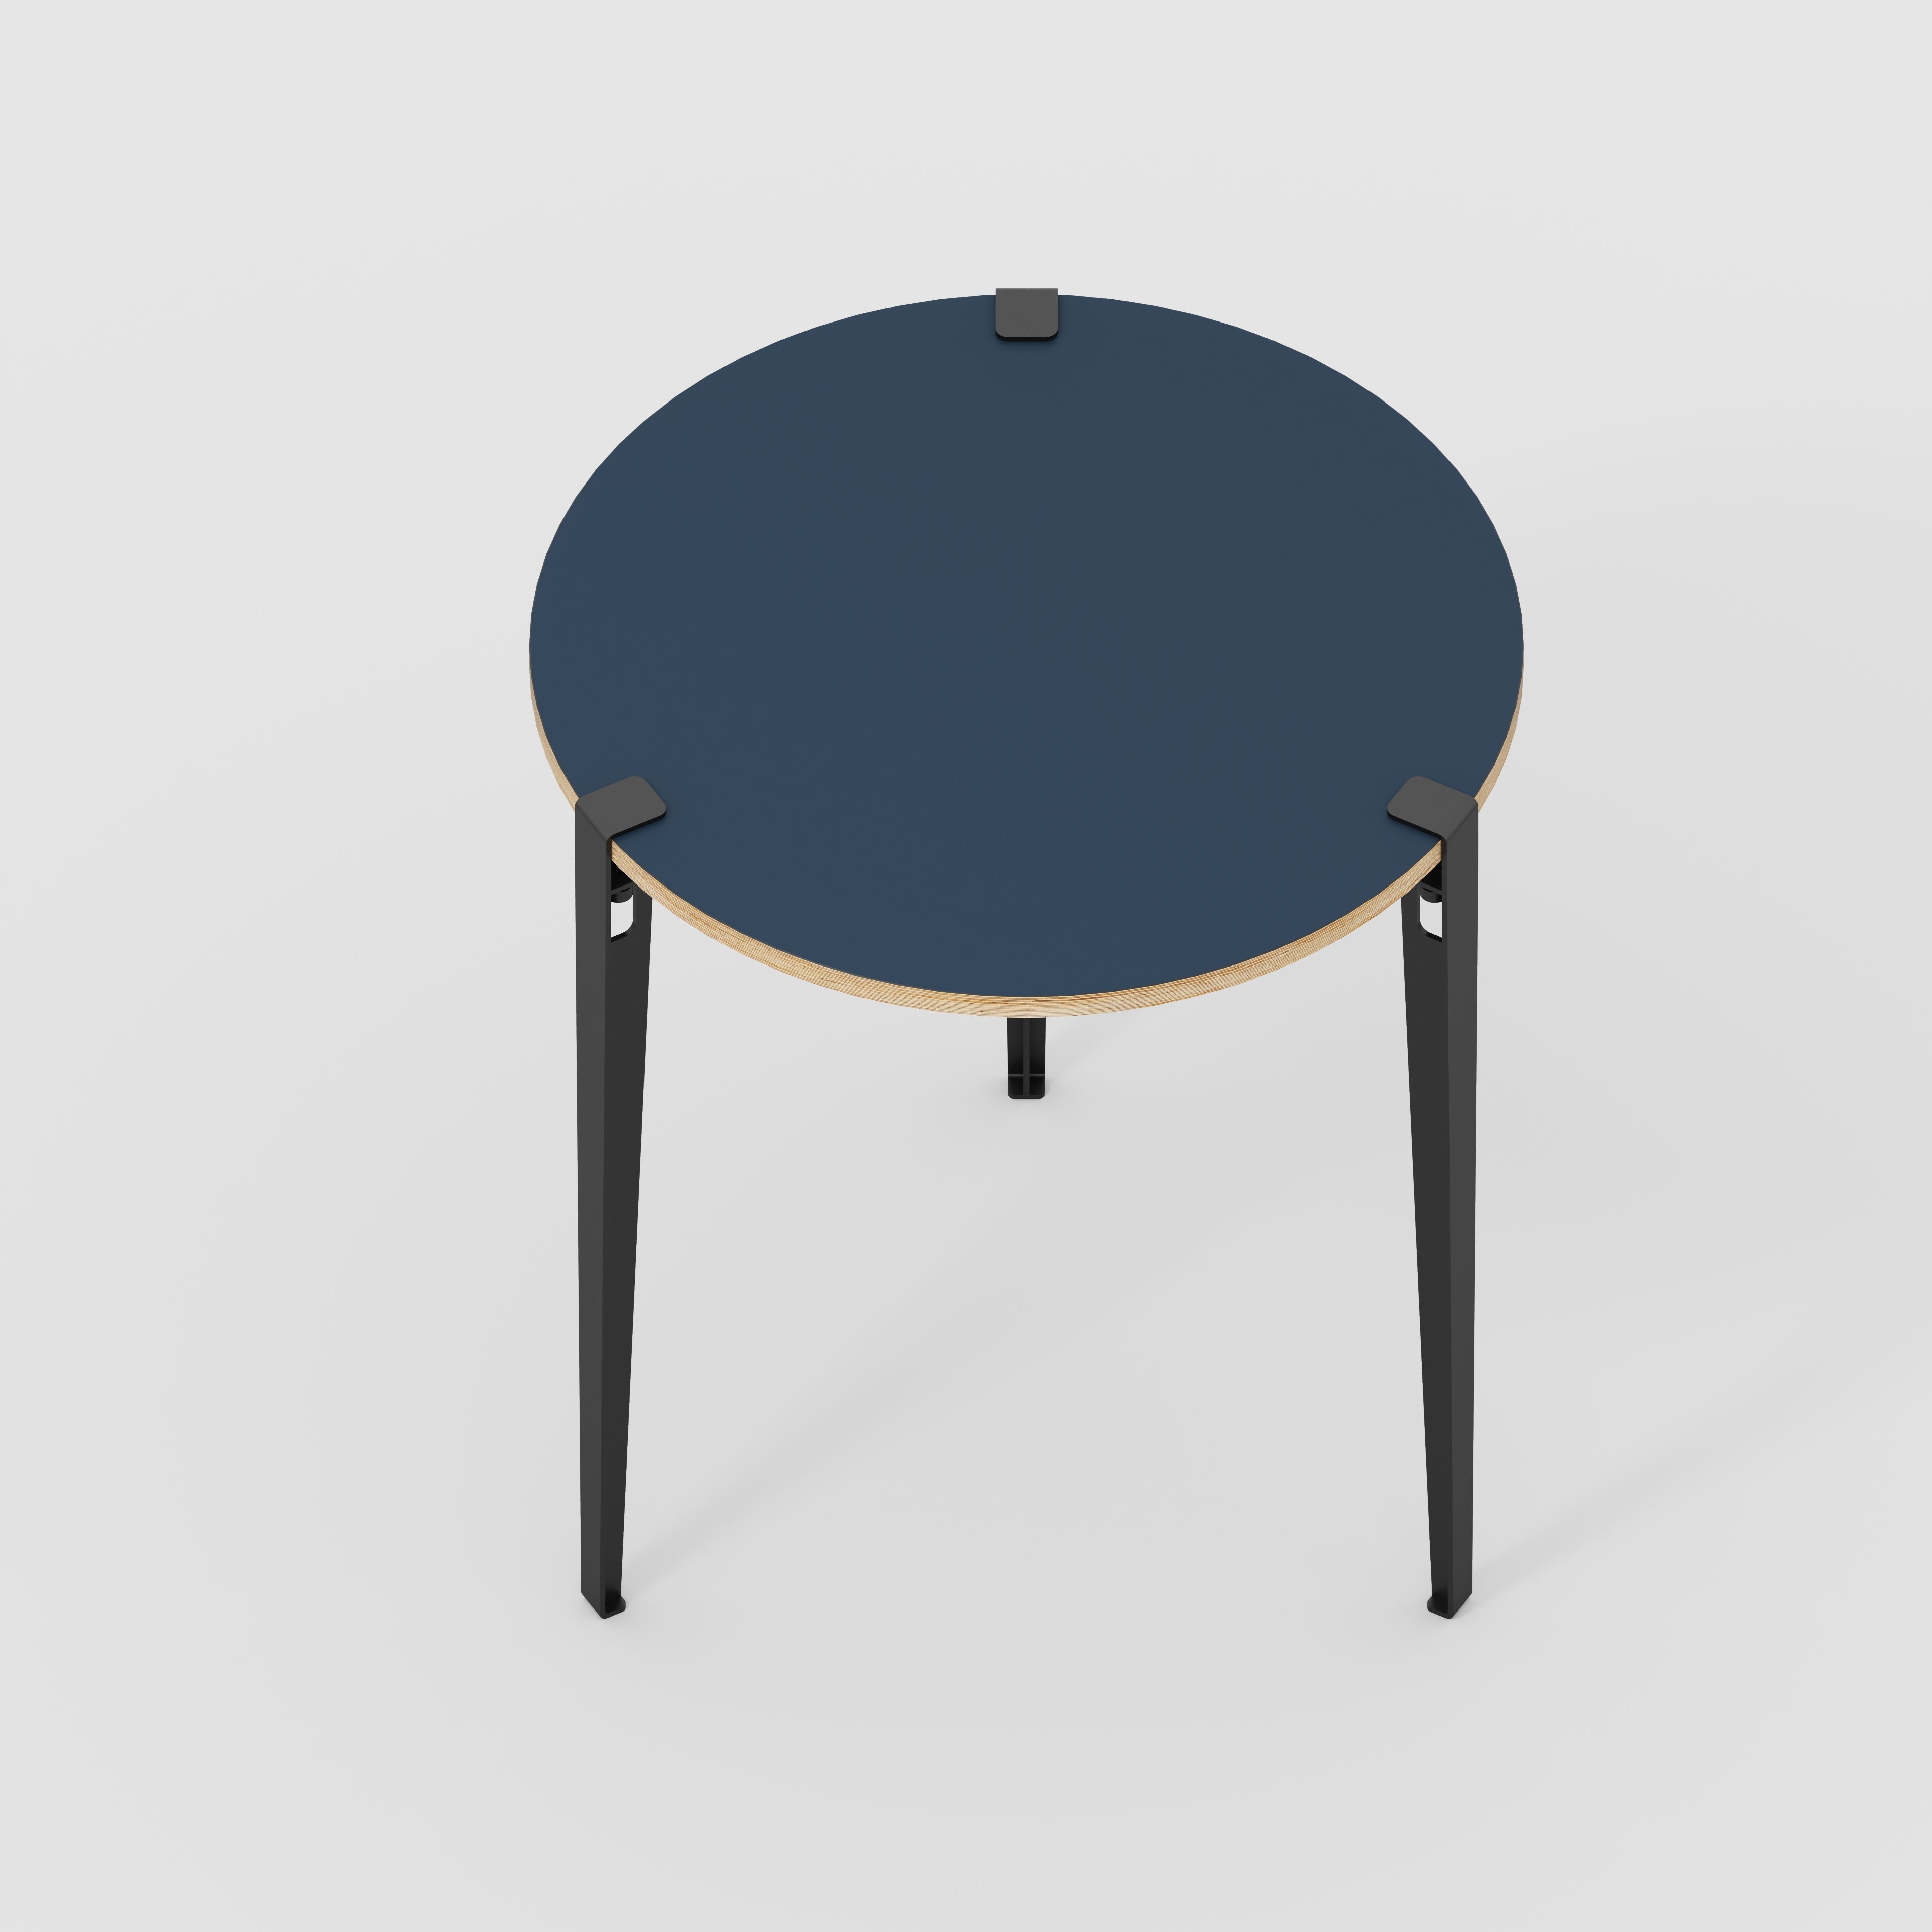 Round Table with Black Tiptoe Legs - Formica Night Sea Blue - 800(dia) x 900(h)